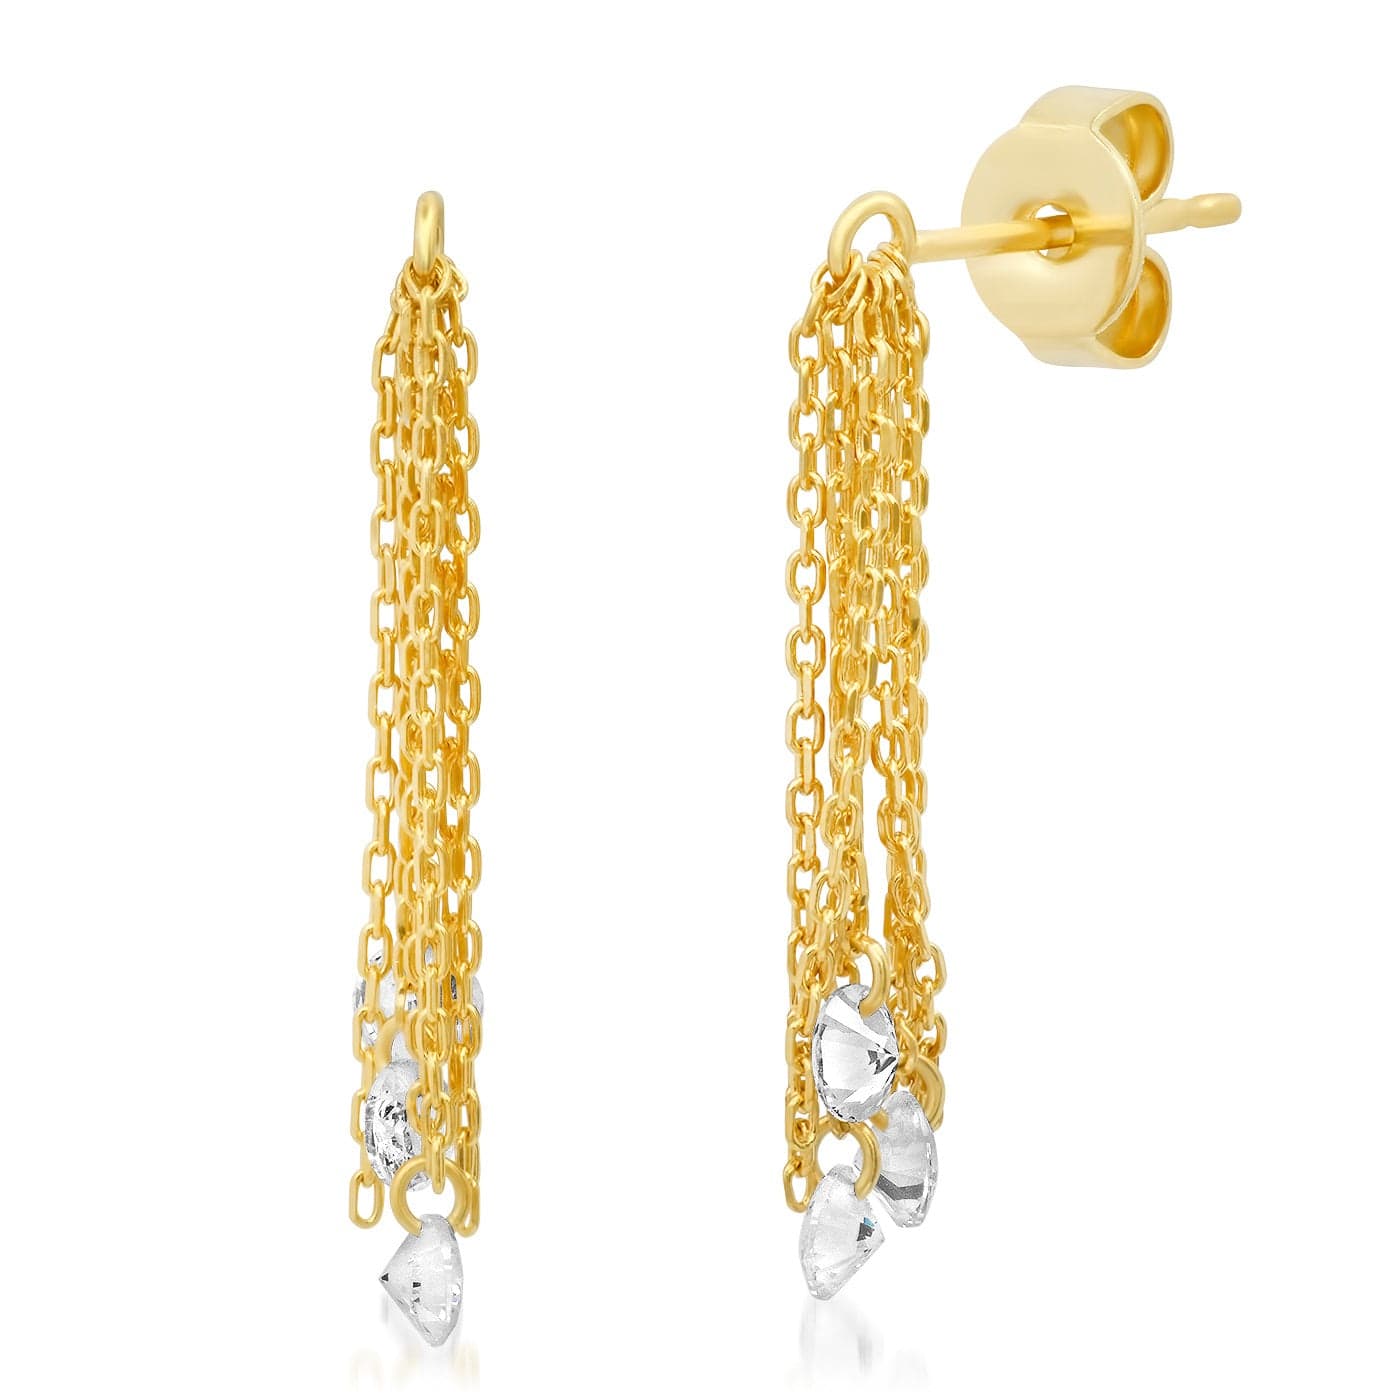 TAI JEWELRY Earrings Elongated Chain Cluster Drop Earring With Multiple Floating Cz Stones